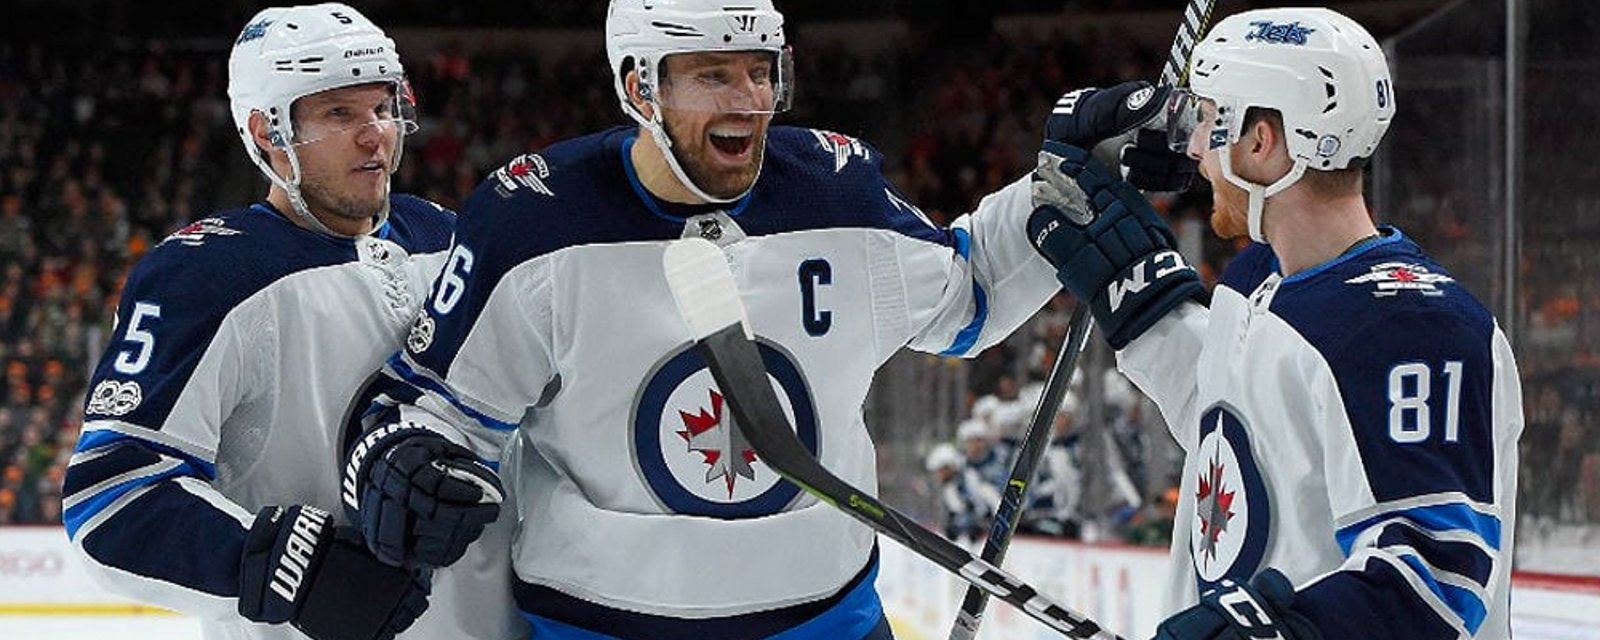 Blake Wheeler: “There’s not going to be any hugging or high-fiving” when NHL returns